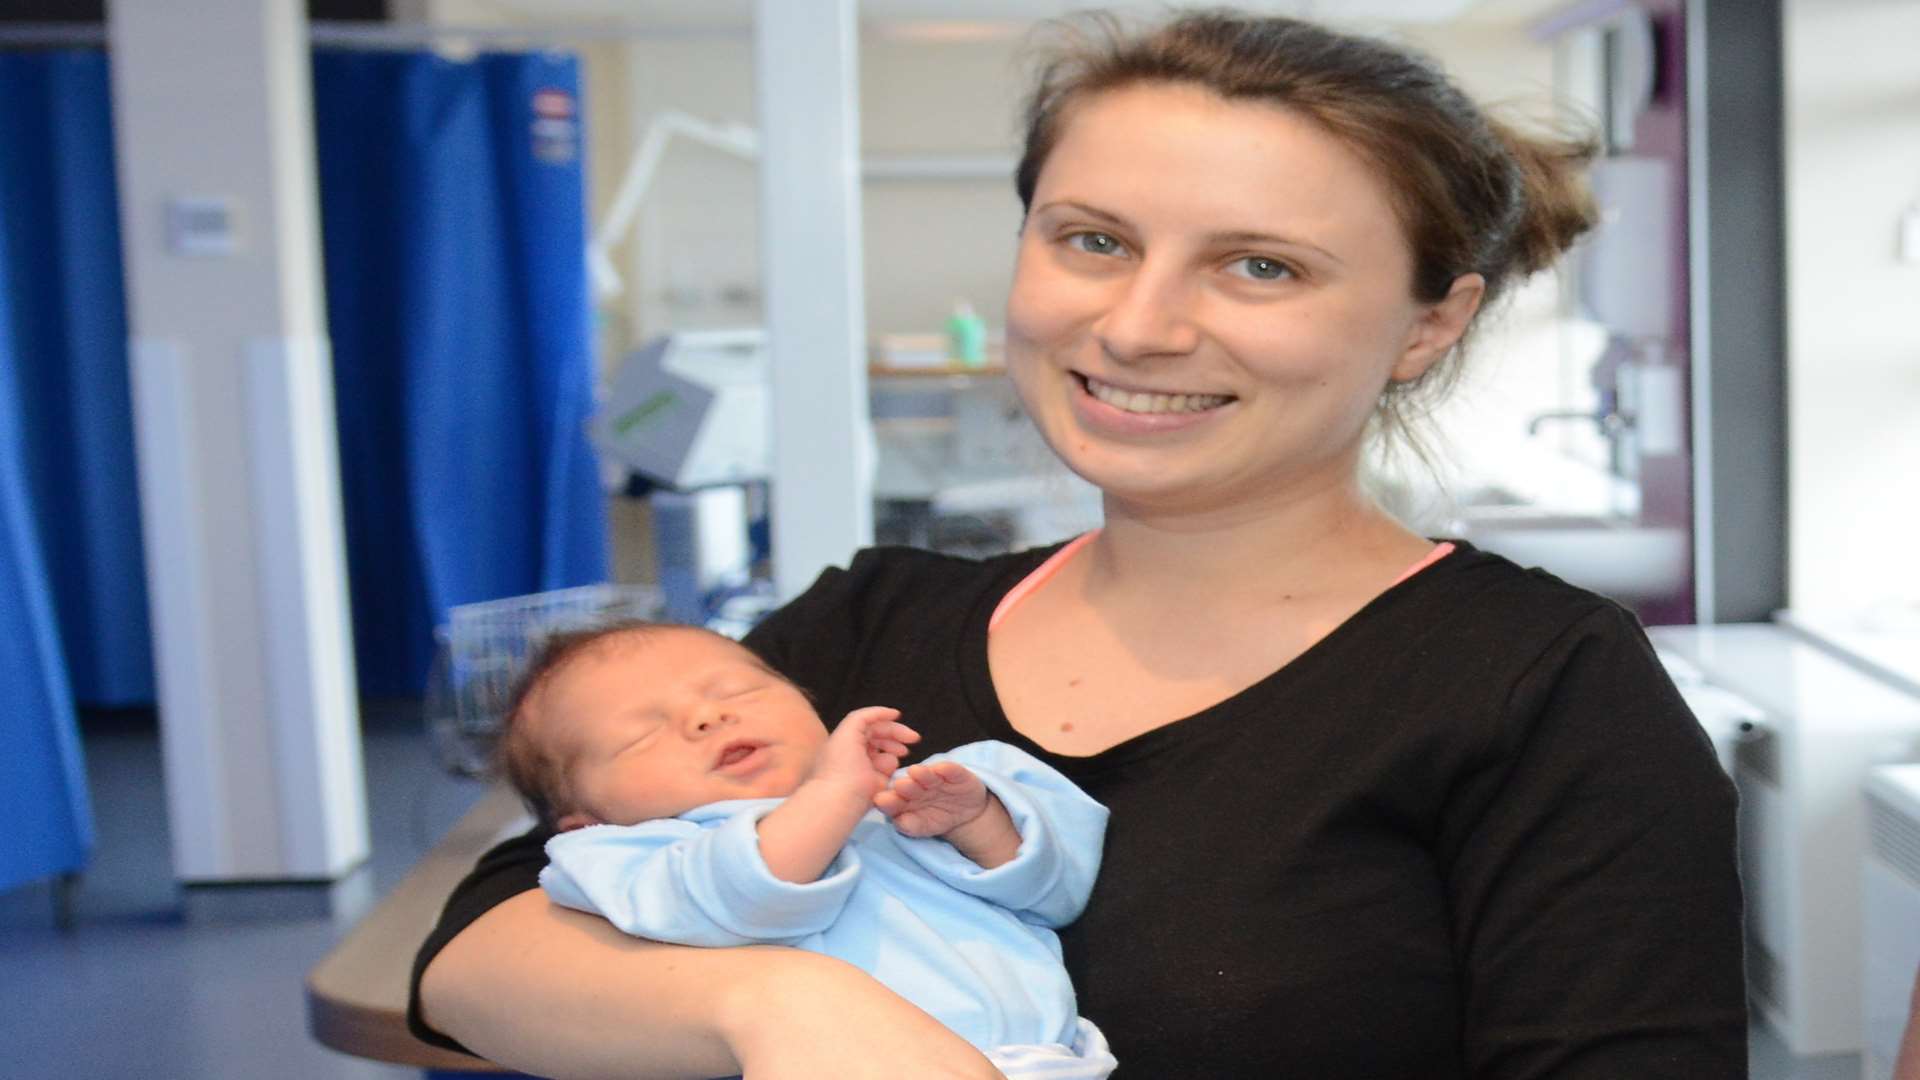 New mum Ioana Vincenzo with her seven day old son